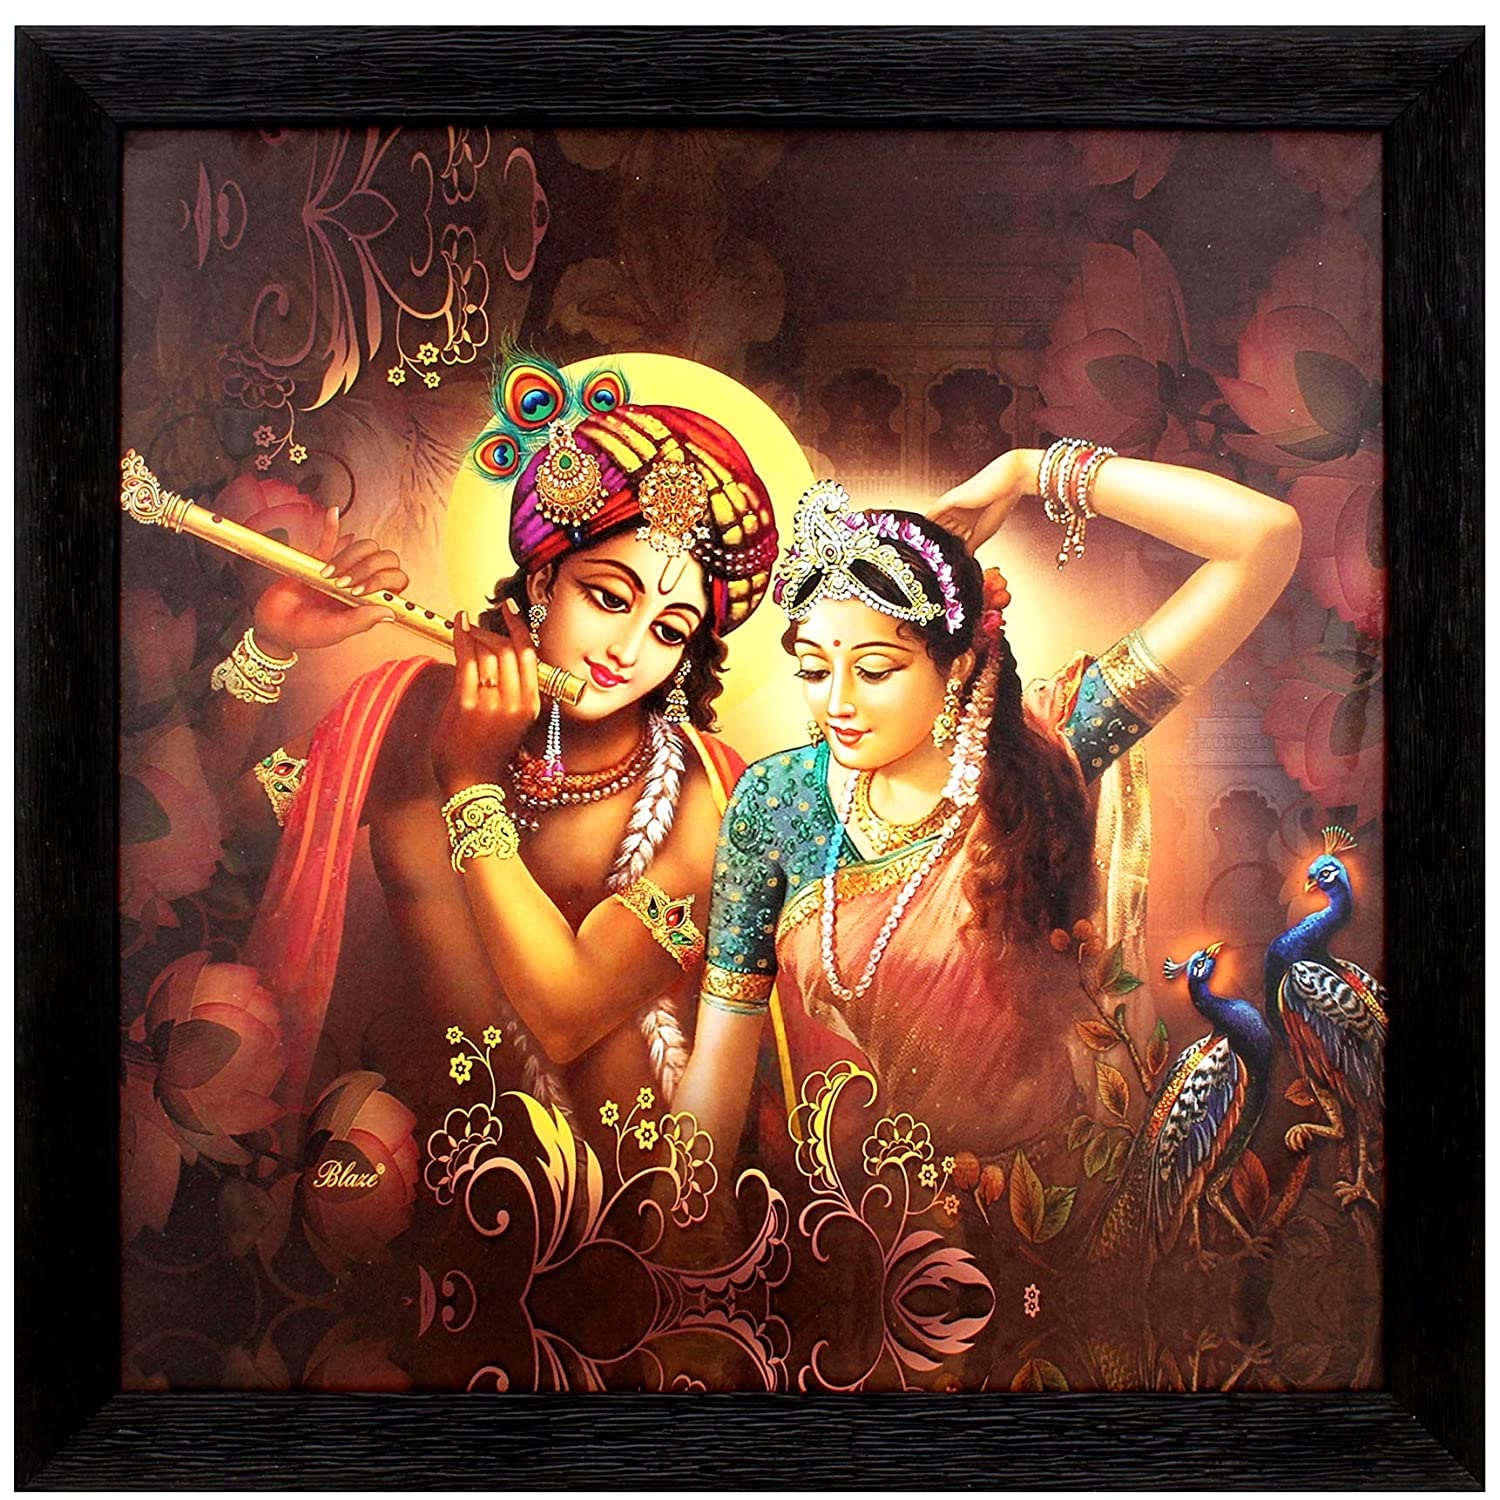 Put a picture of Radha Krishna in your house in this direction! There will be many benefits